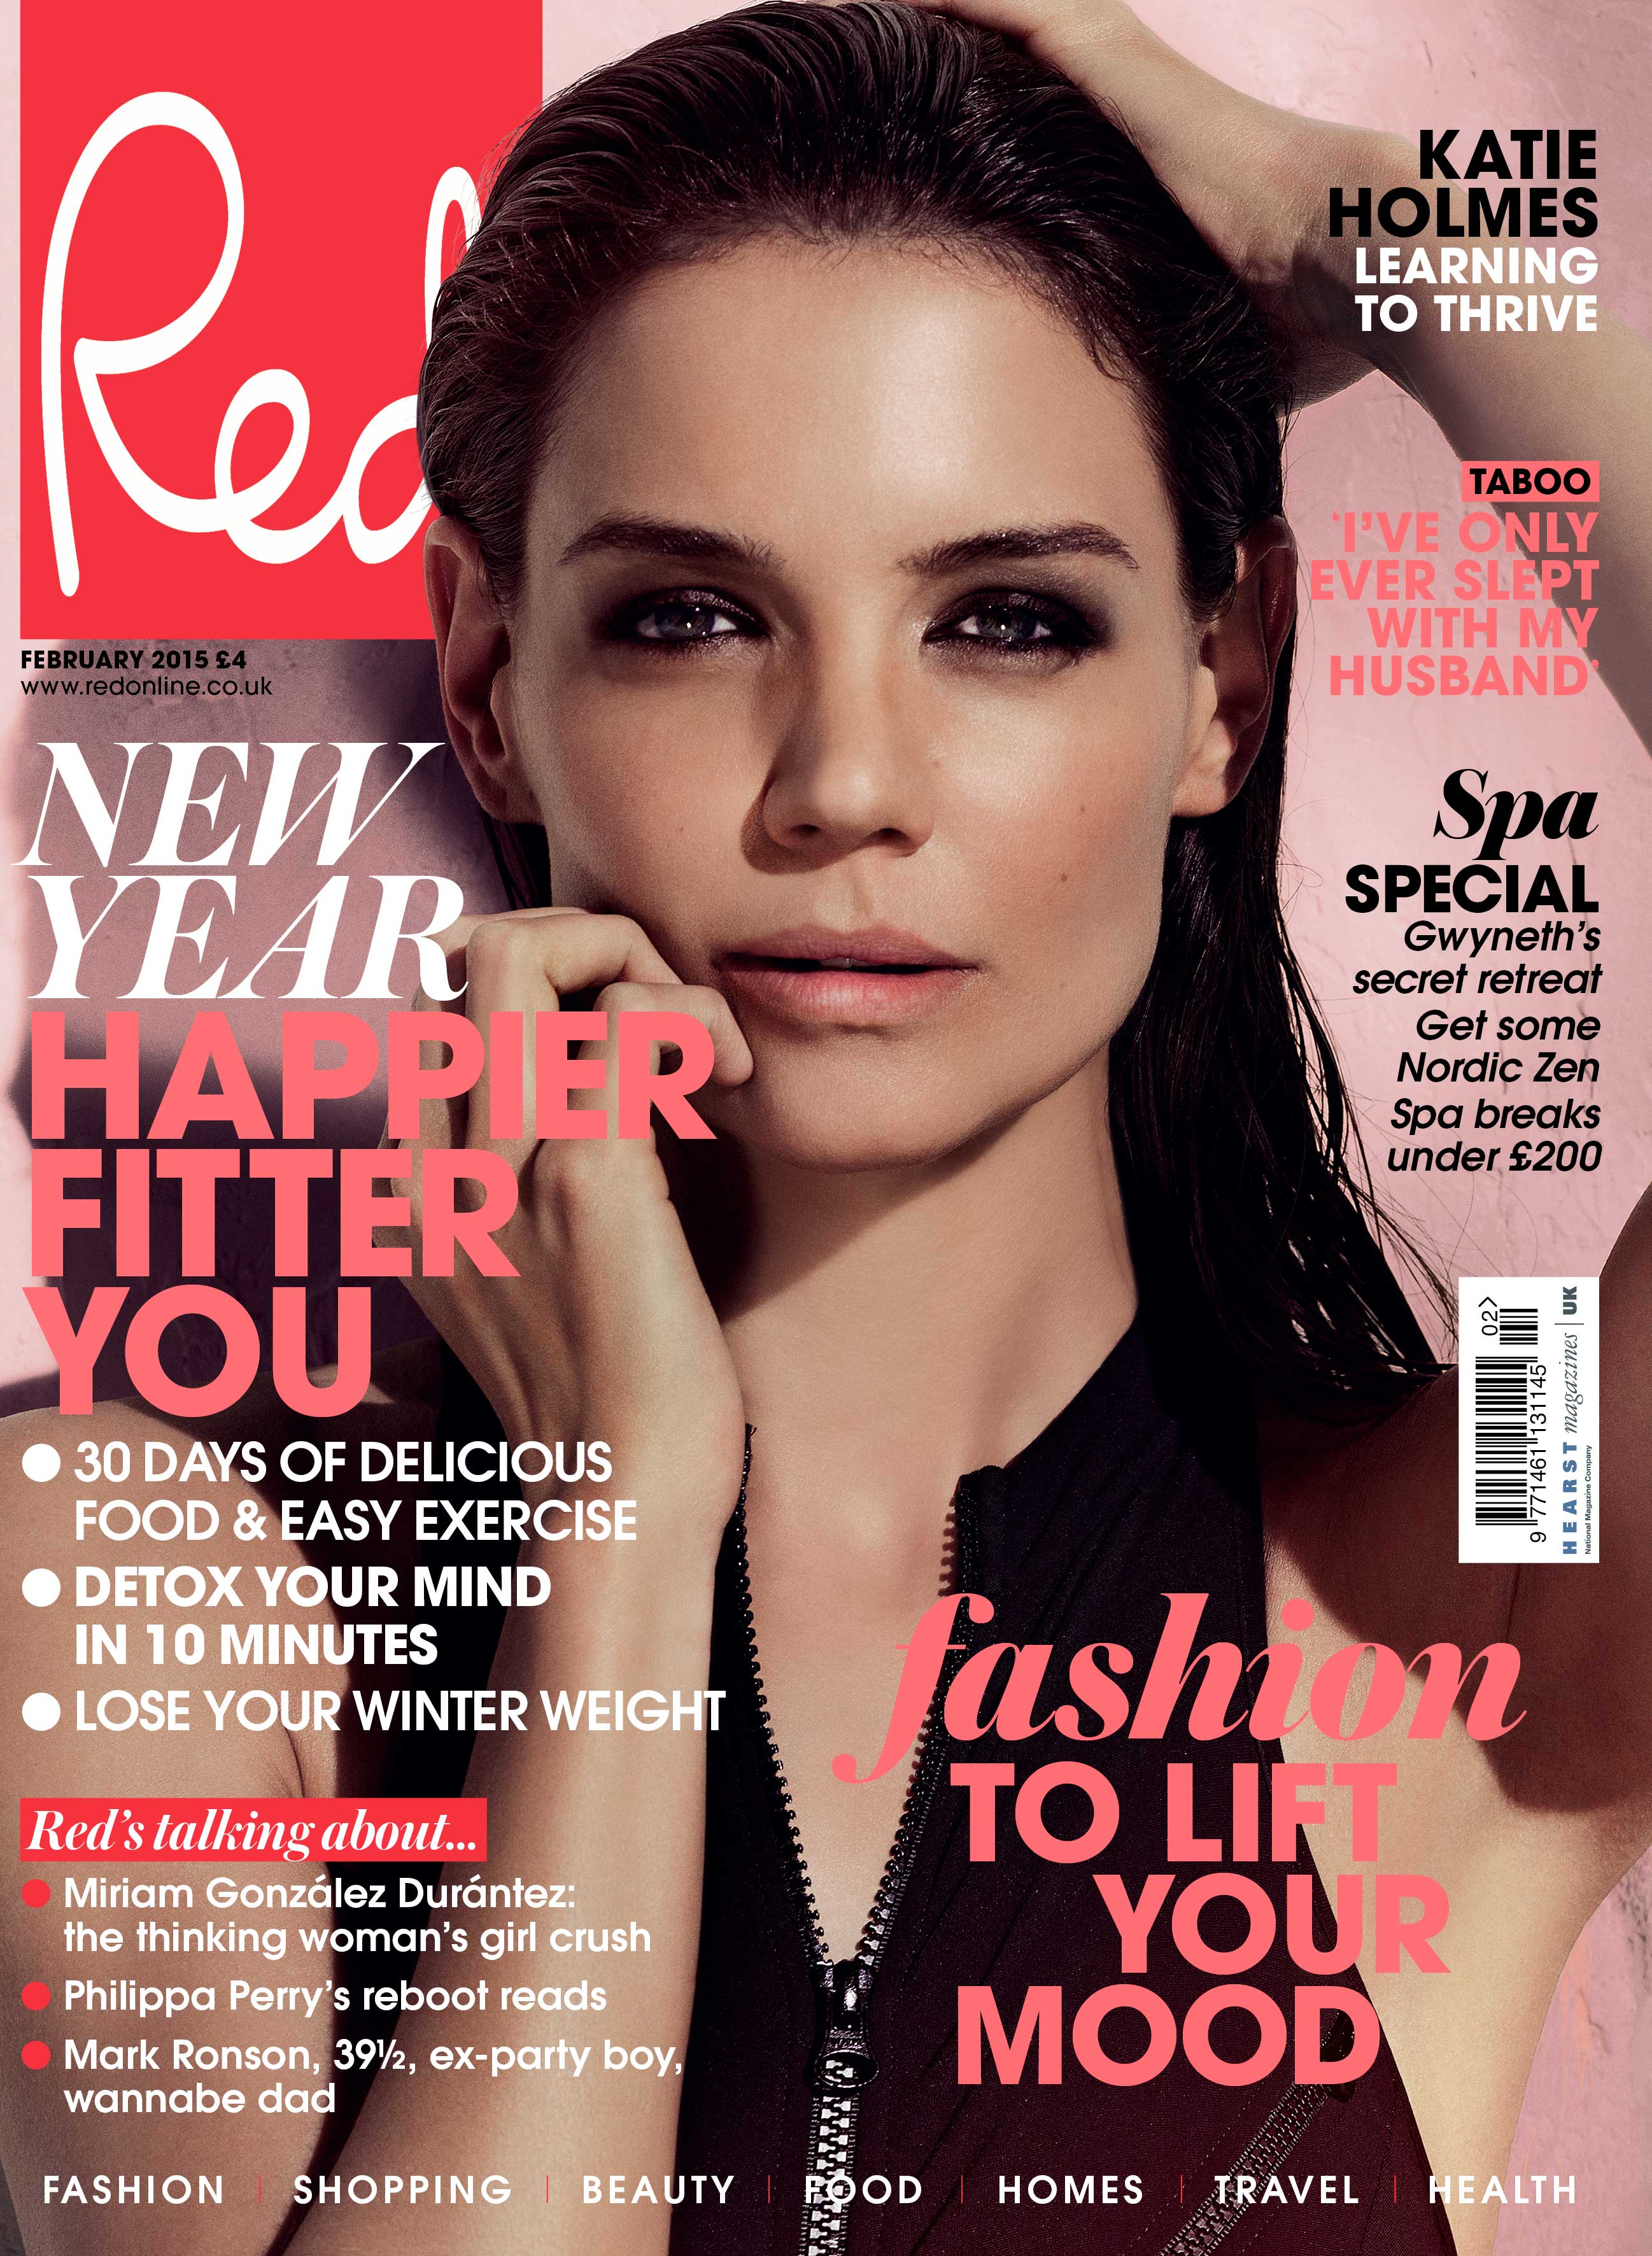 Magazine | Subscriptions and Subscriber Offers - Red Online